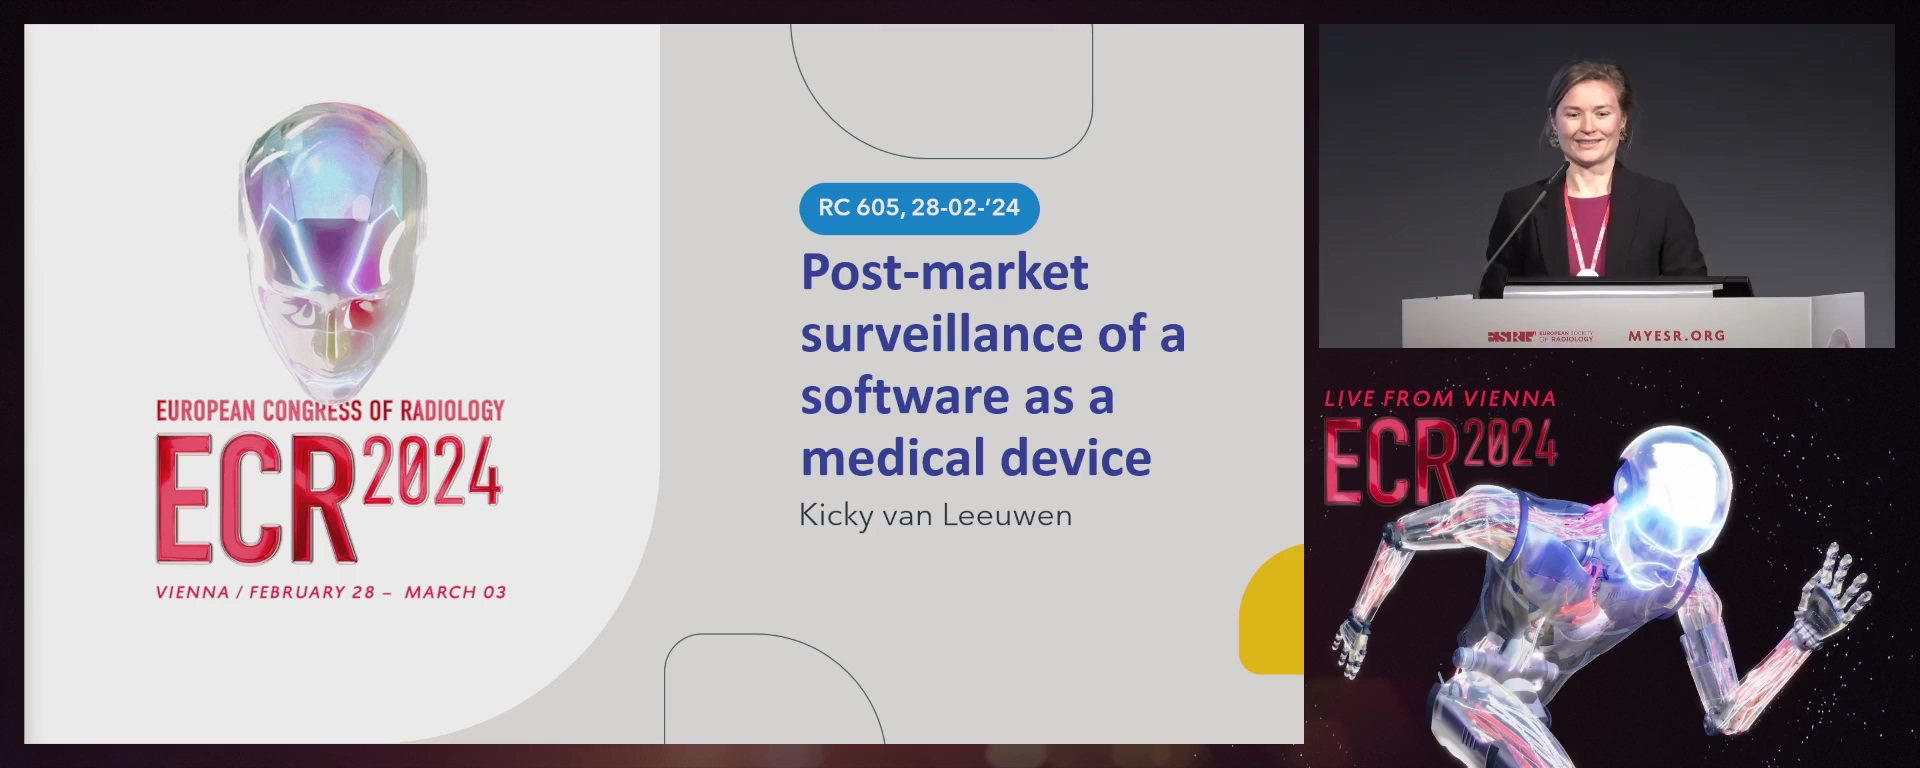 Post-market surveillance of a software as a medical device